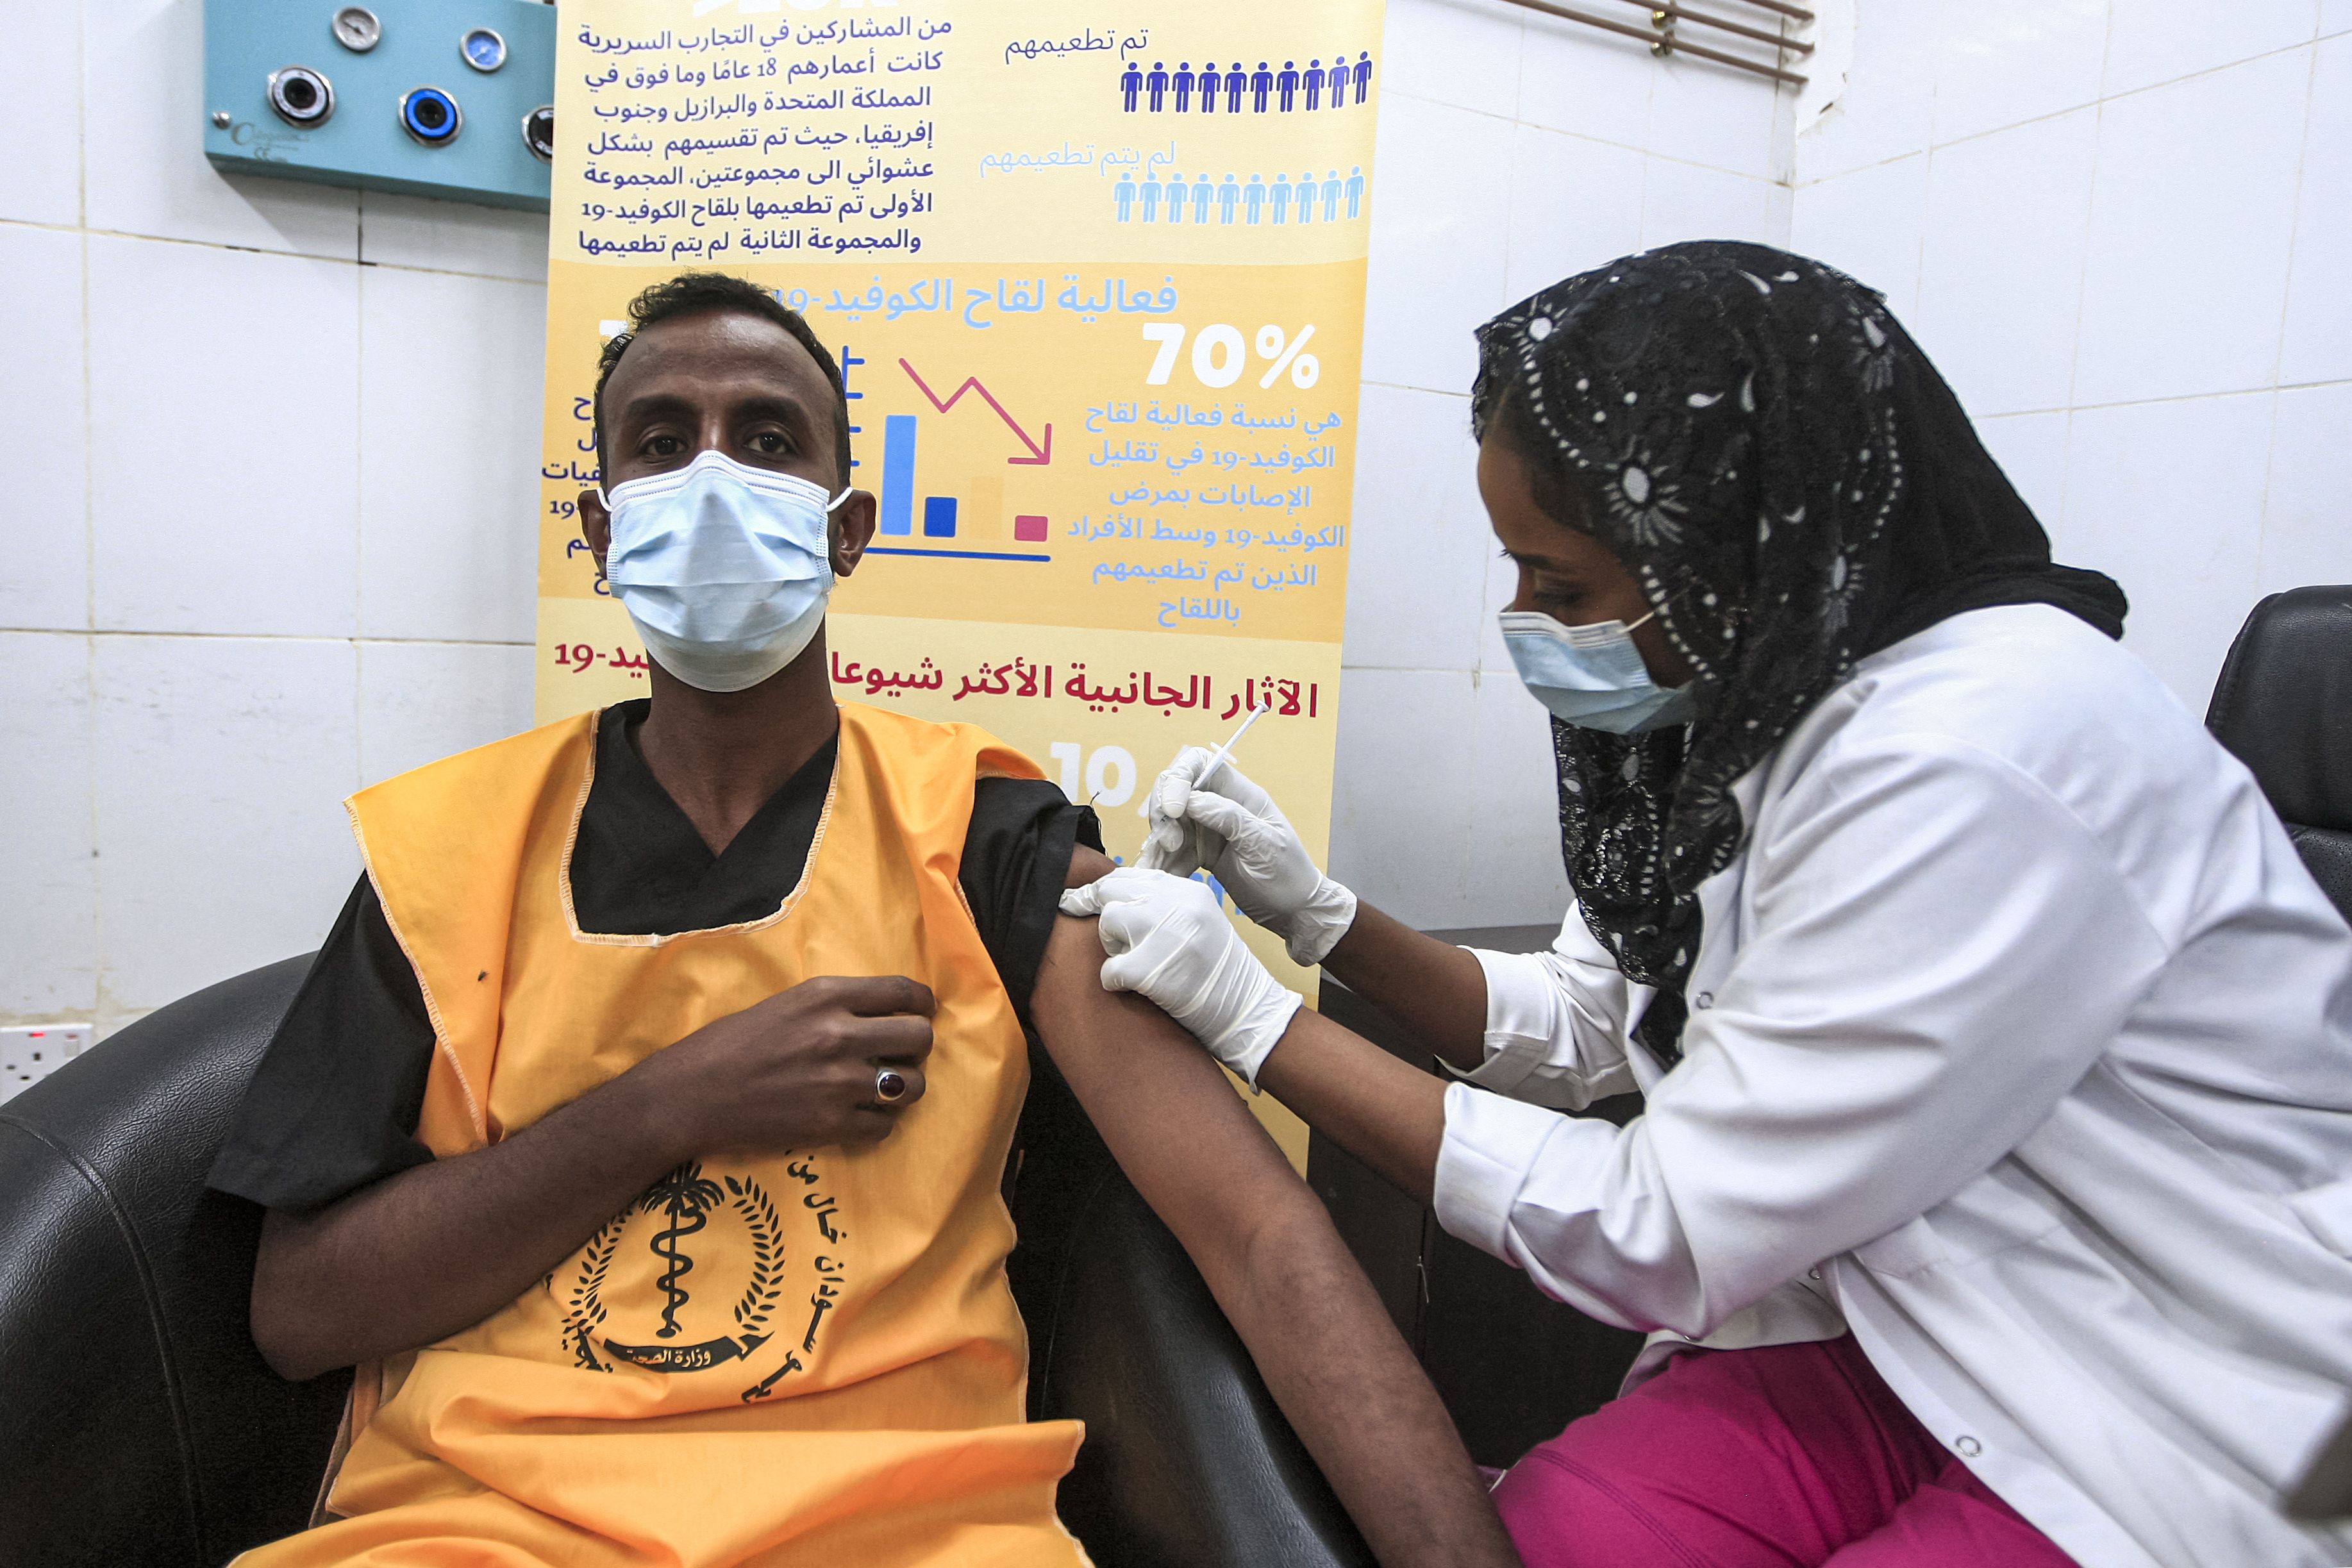 A medical worker receives a dose of the Oxford-AstraZeneca COVID-19 coronavirus vaccine at the Jabra Hospital for Emergency and Injuries in Sudan's capital Khartoum on March 9